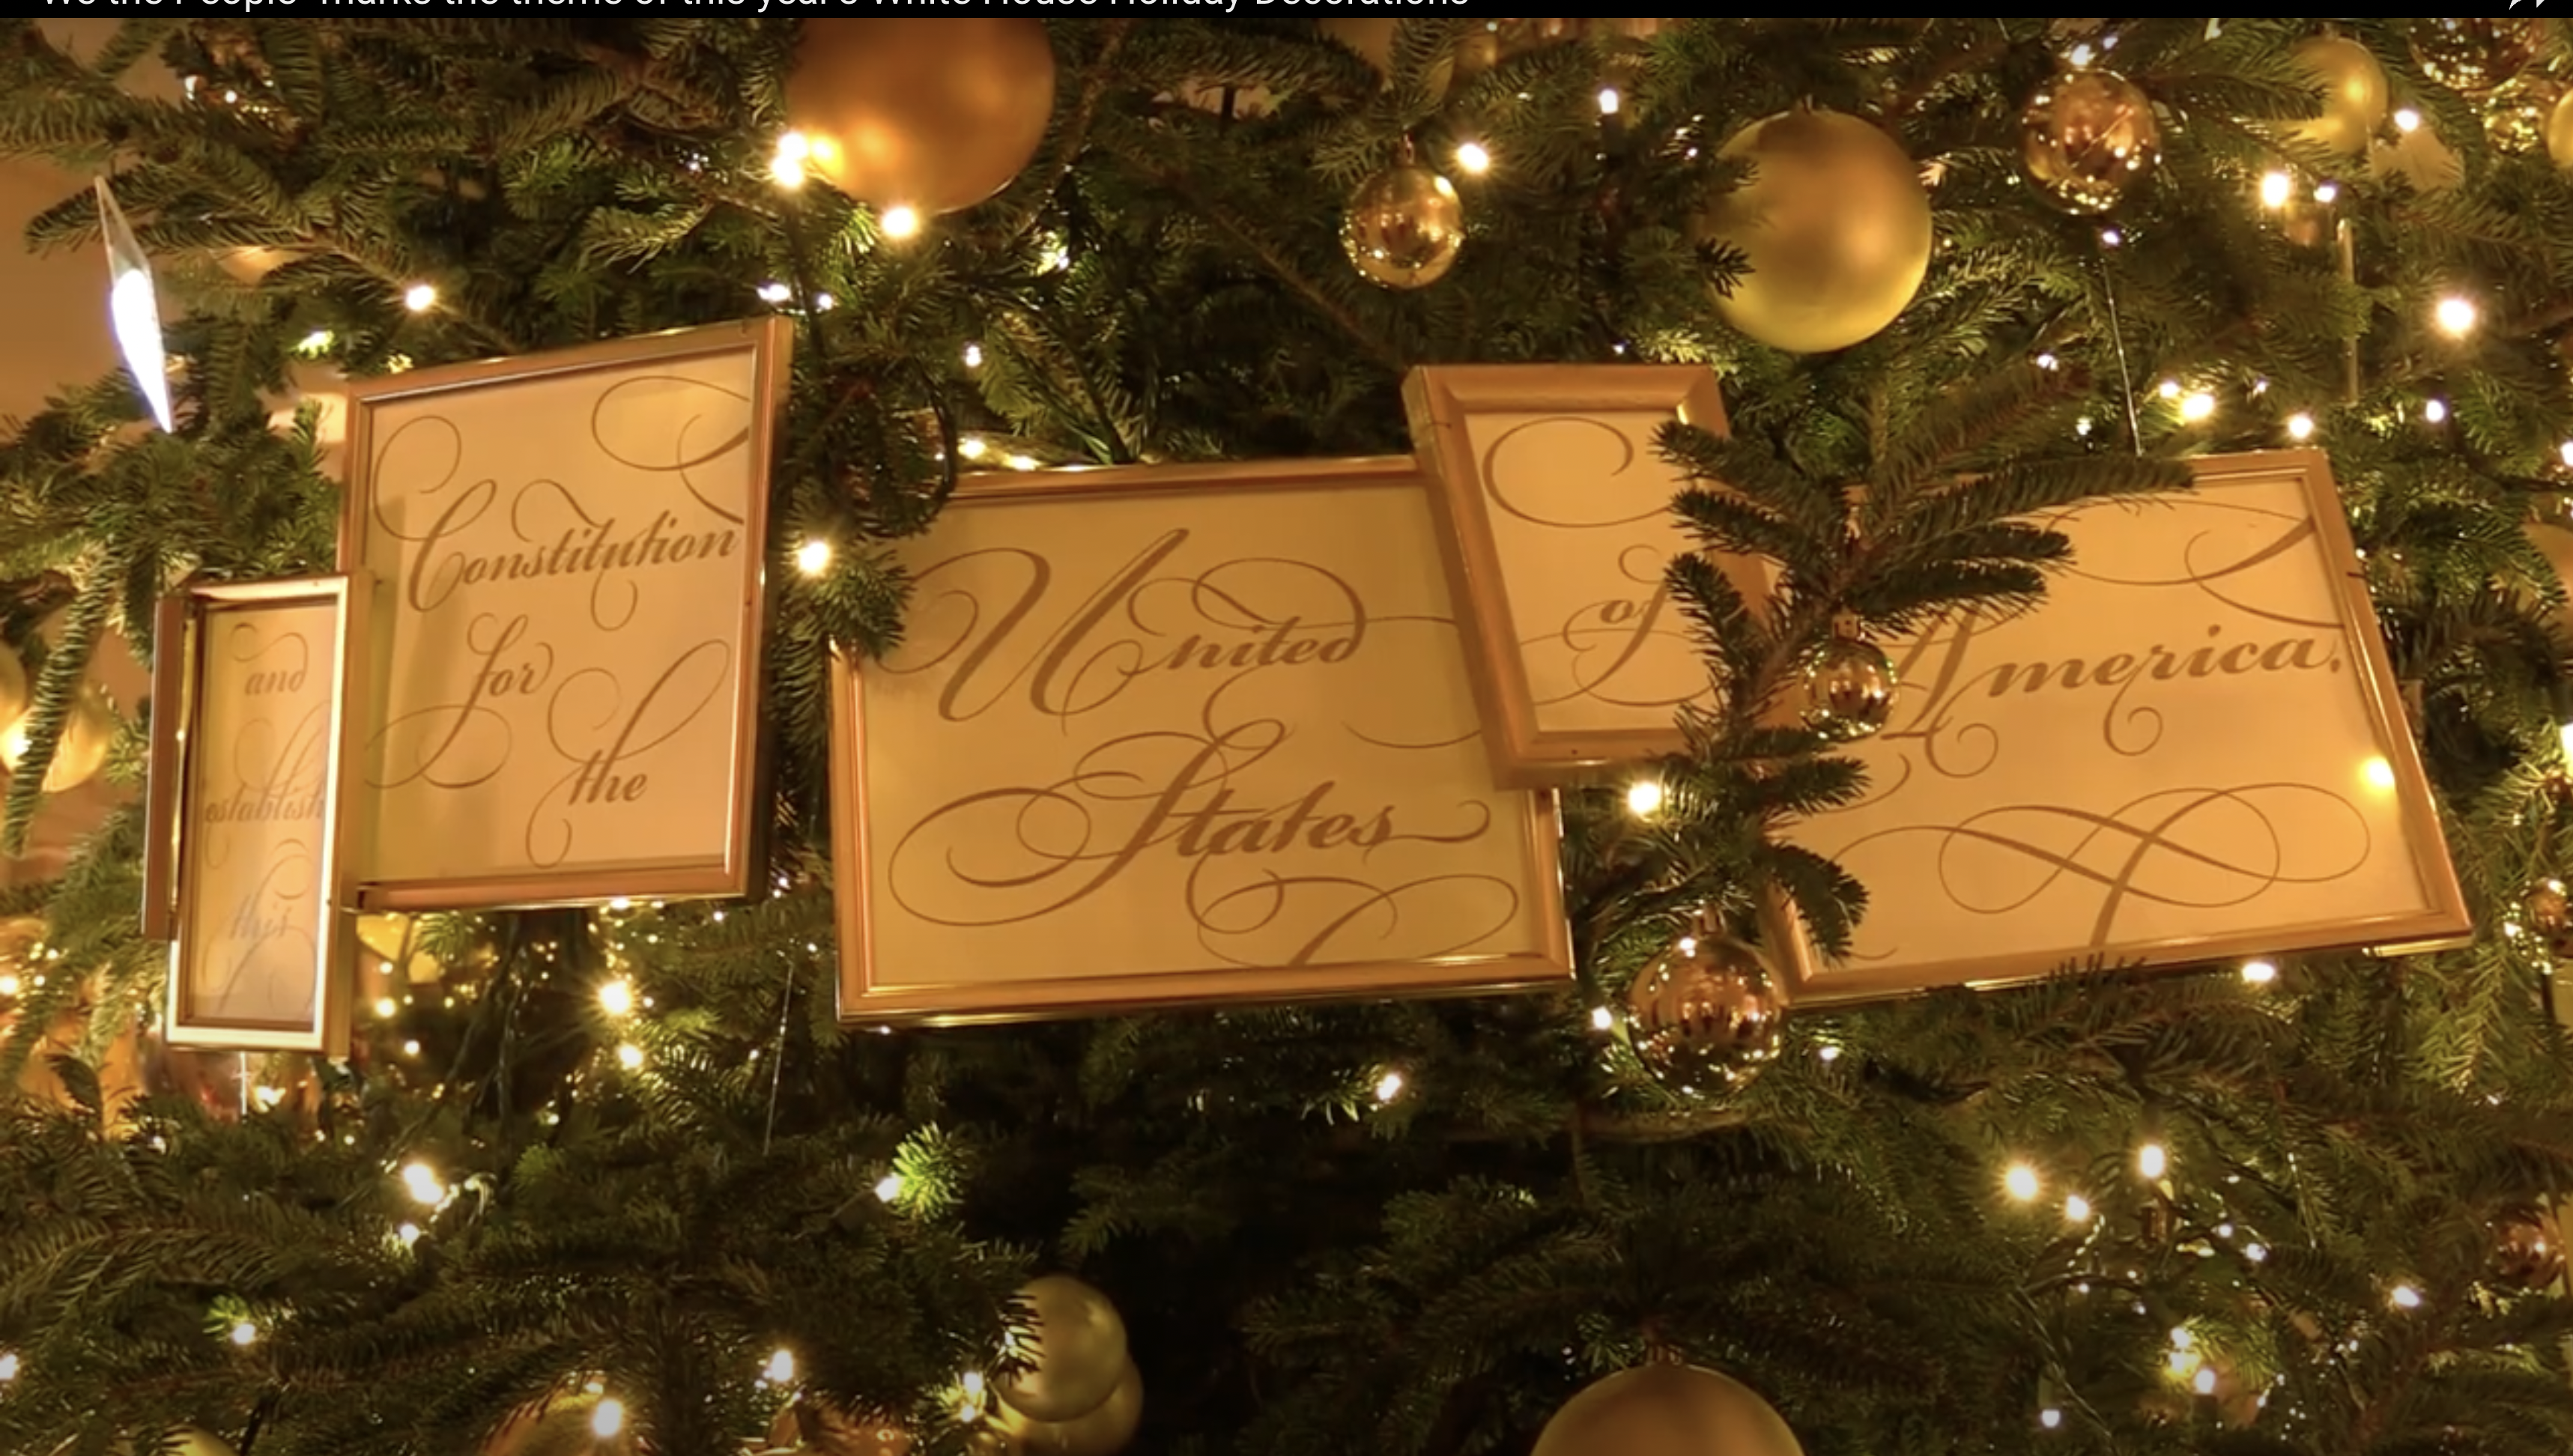 “We the People” Marks the Theme of This Year’s White House Holiday Decorations